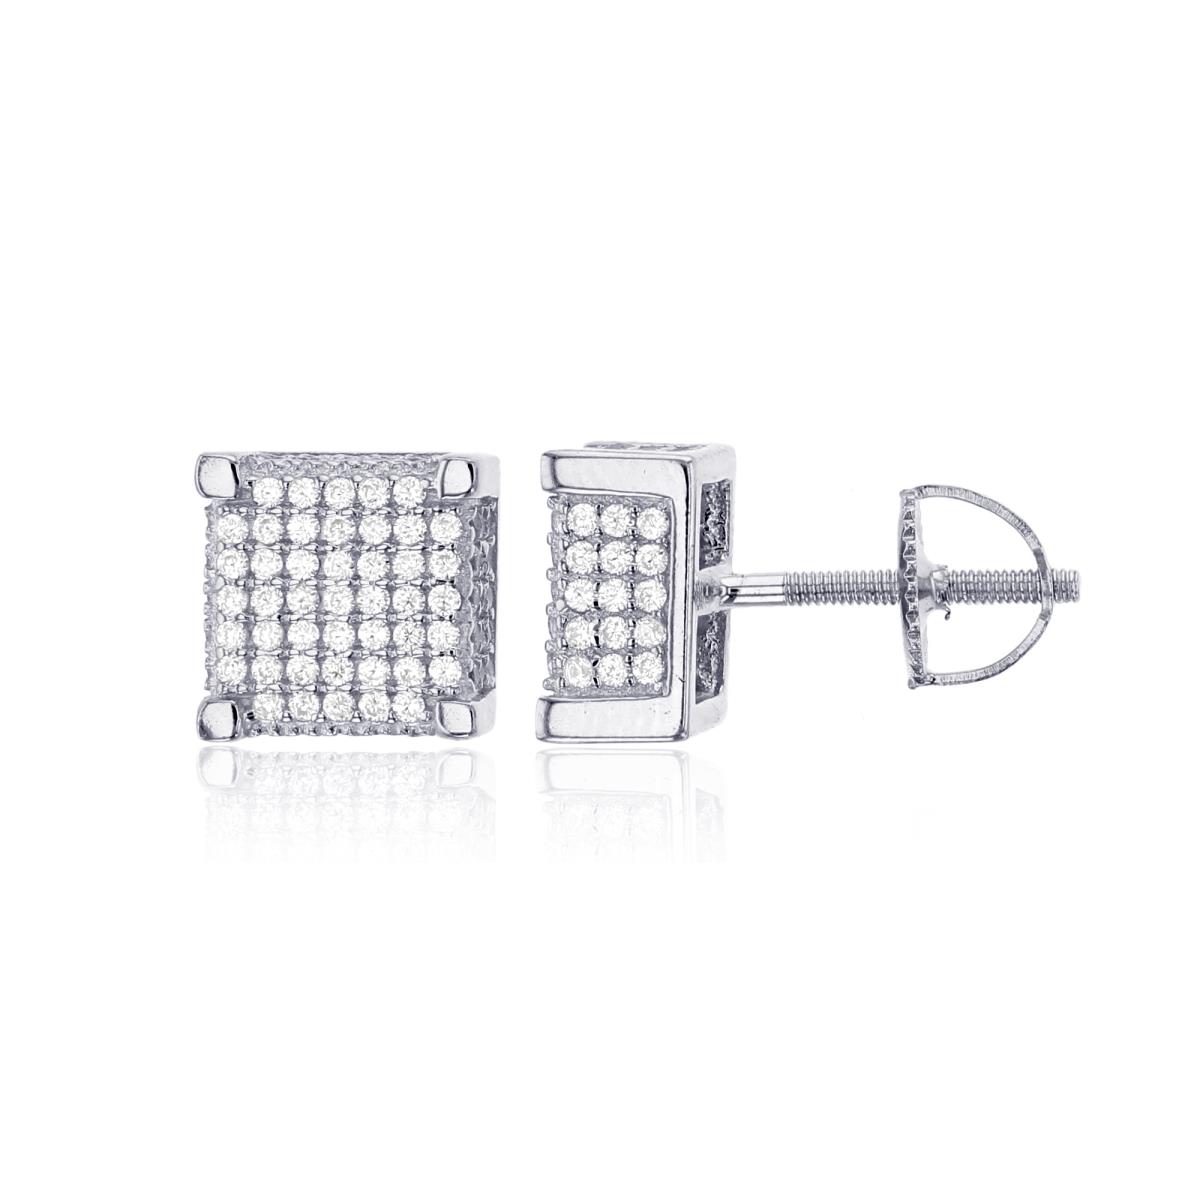 Sterling Silver Rhodium Micropave 6x6 3D Square Screw-Back Mens Stud Earring